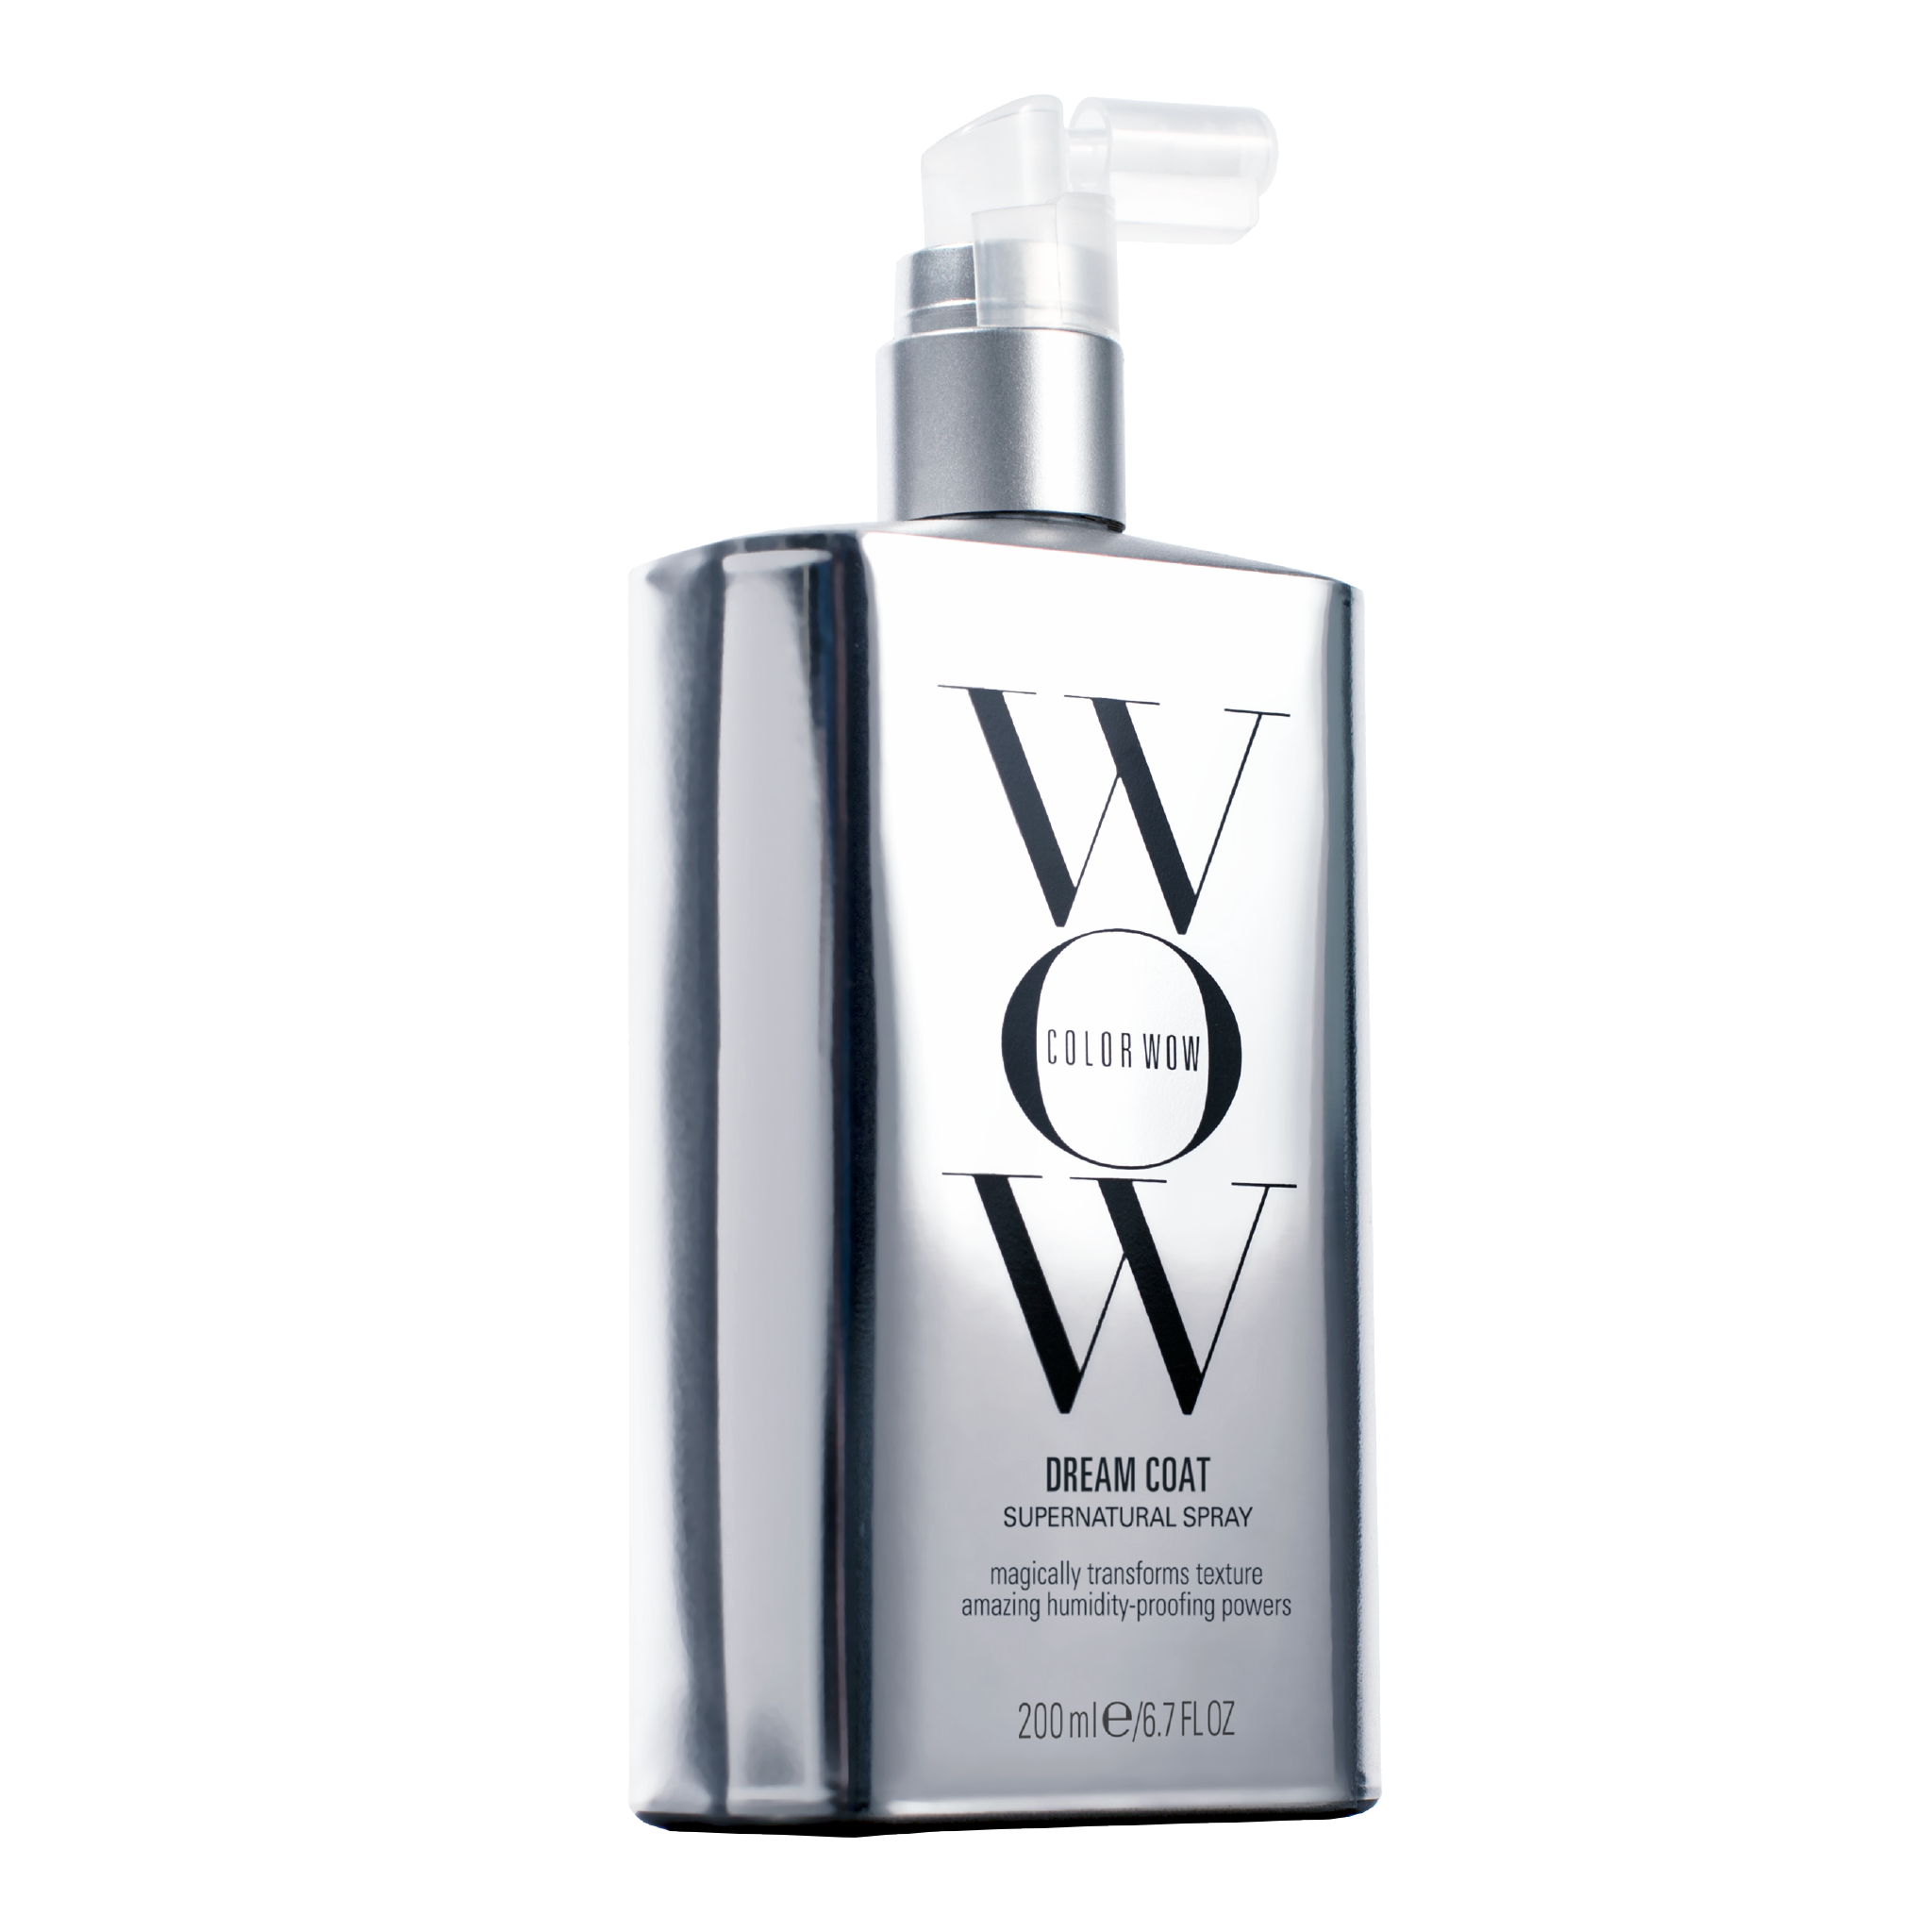 Color WOW – NewCo Beauty